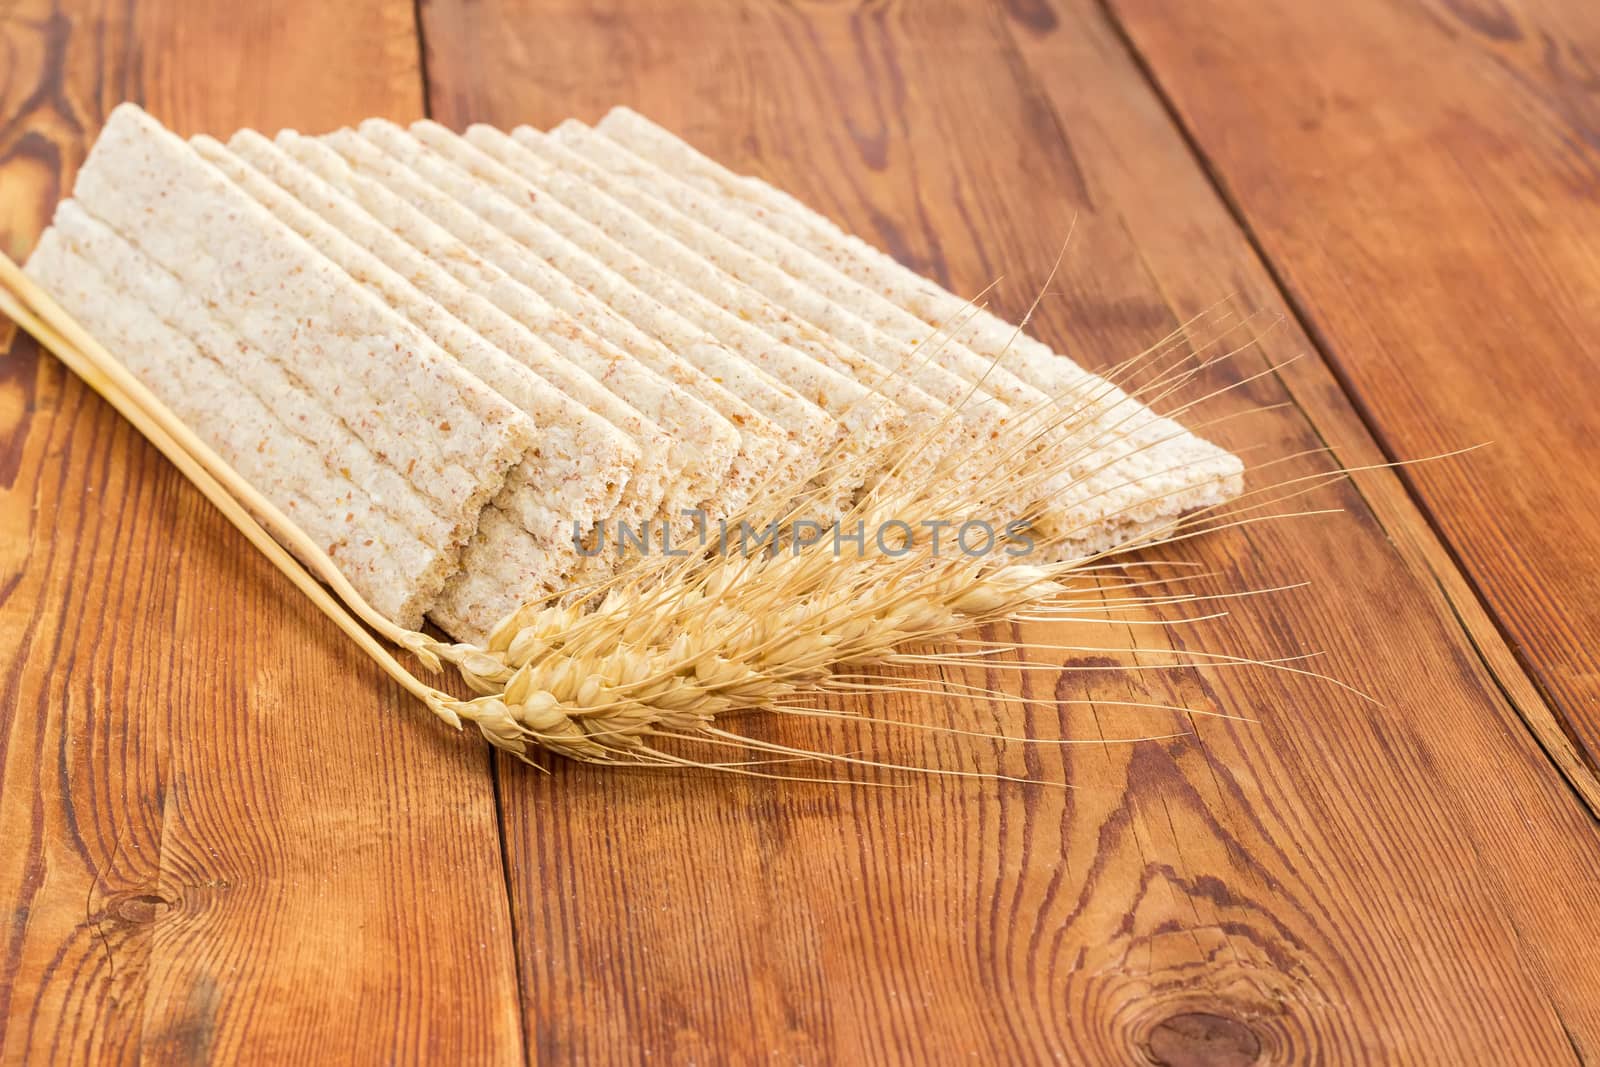 Several dietary wheat wholegrain crispbread with adding a buckwheat and a barley and two wheat spikes closeup on a surface of an old wooden planks
